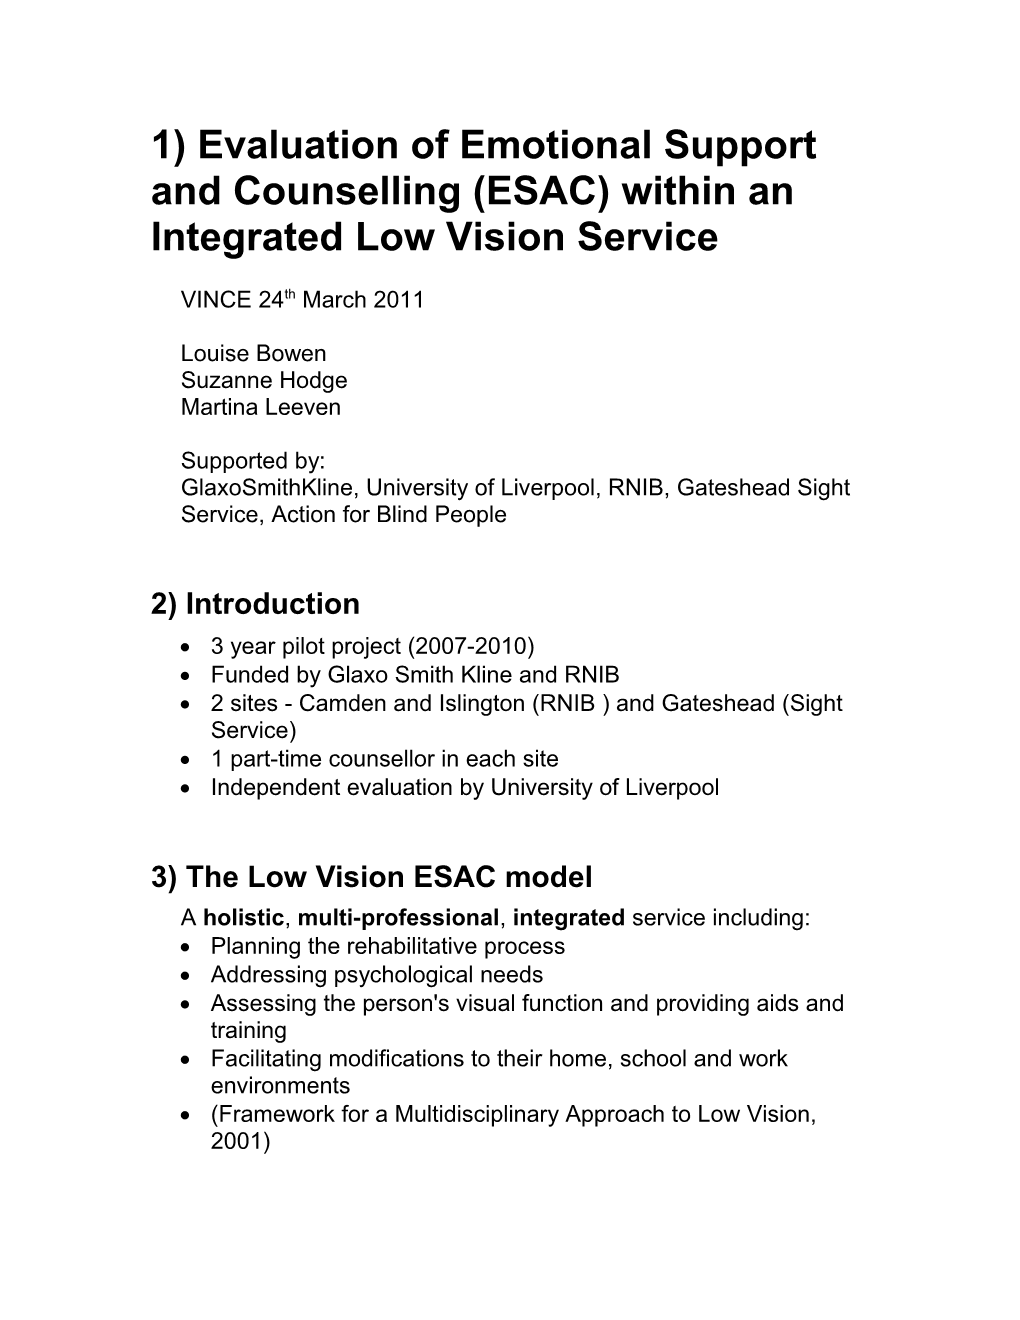 Evaluation of Emotional Support and Counselling (ESAC) Within an Integrated Low Vision Service